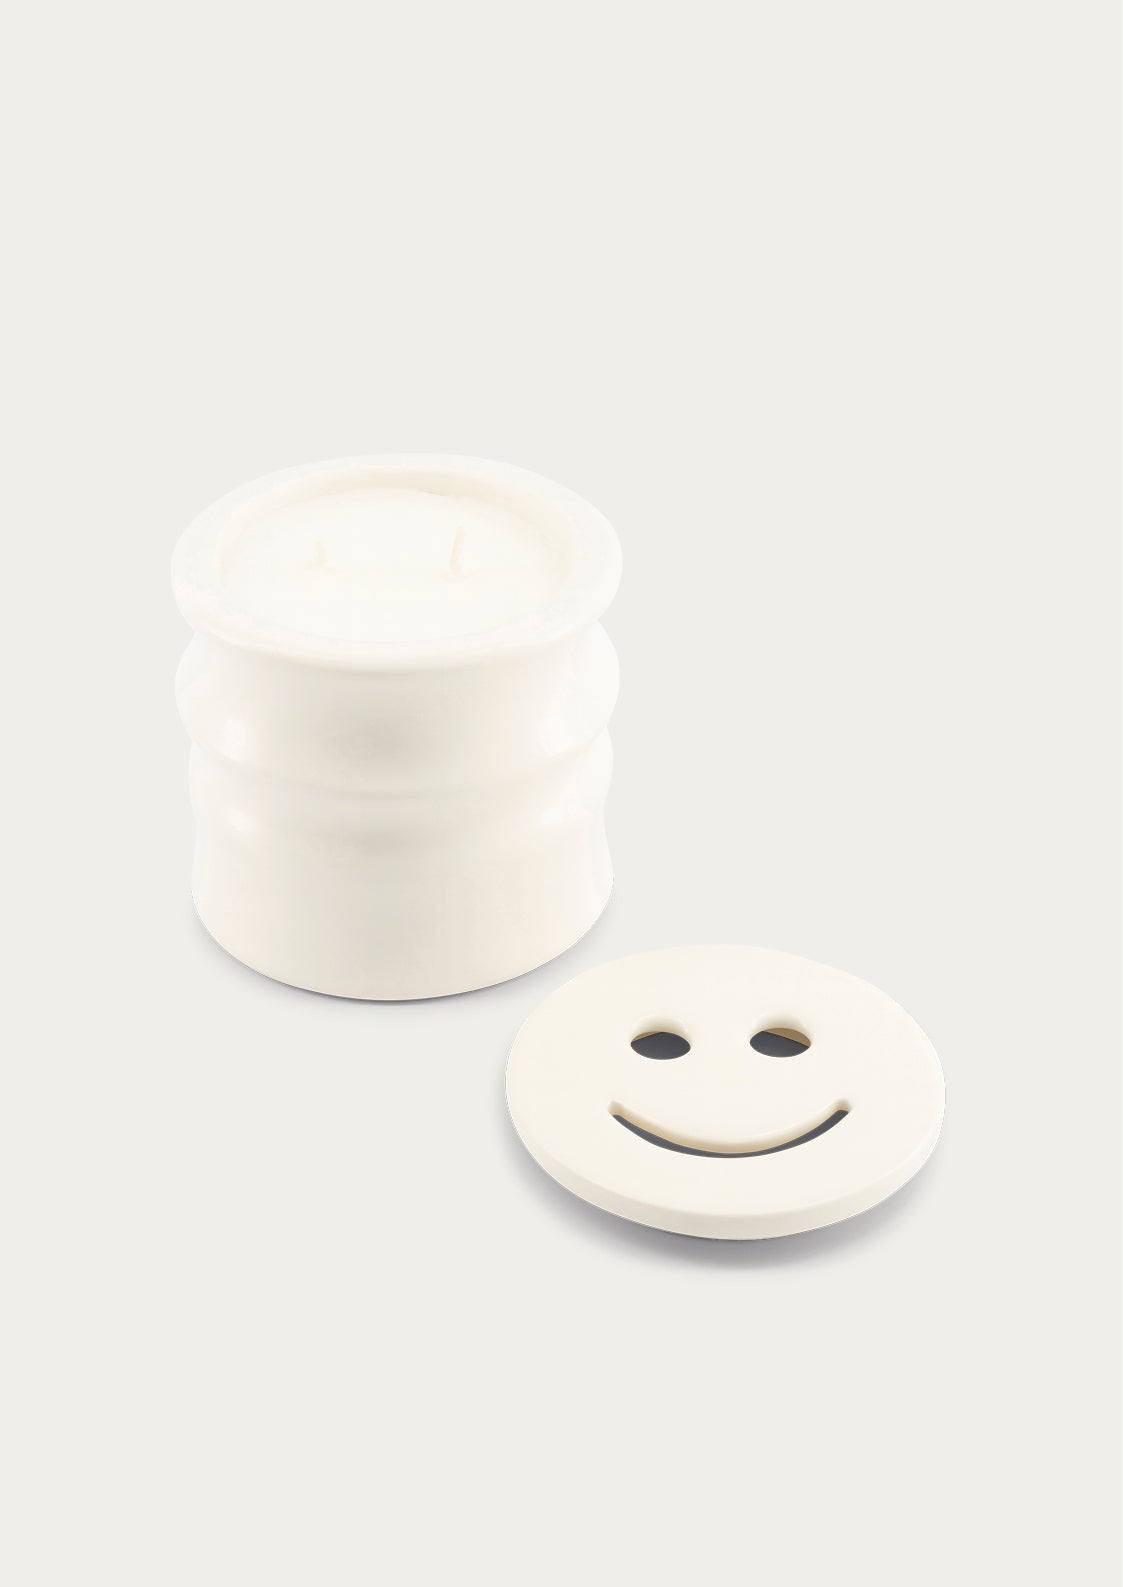 Shape 01.01 White - SCENTED CANDLE with natural refillable wax and lid